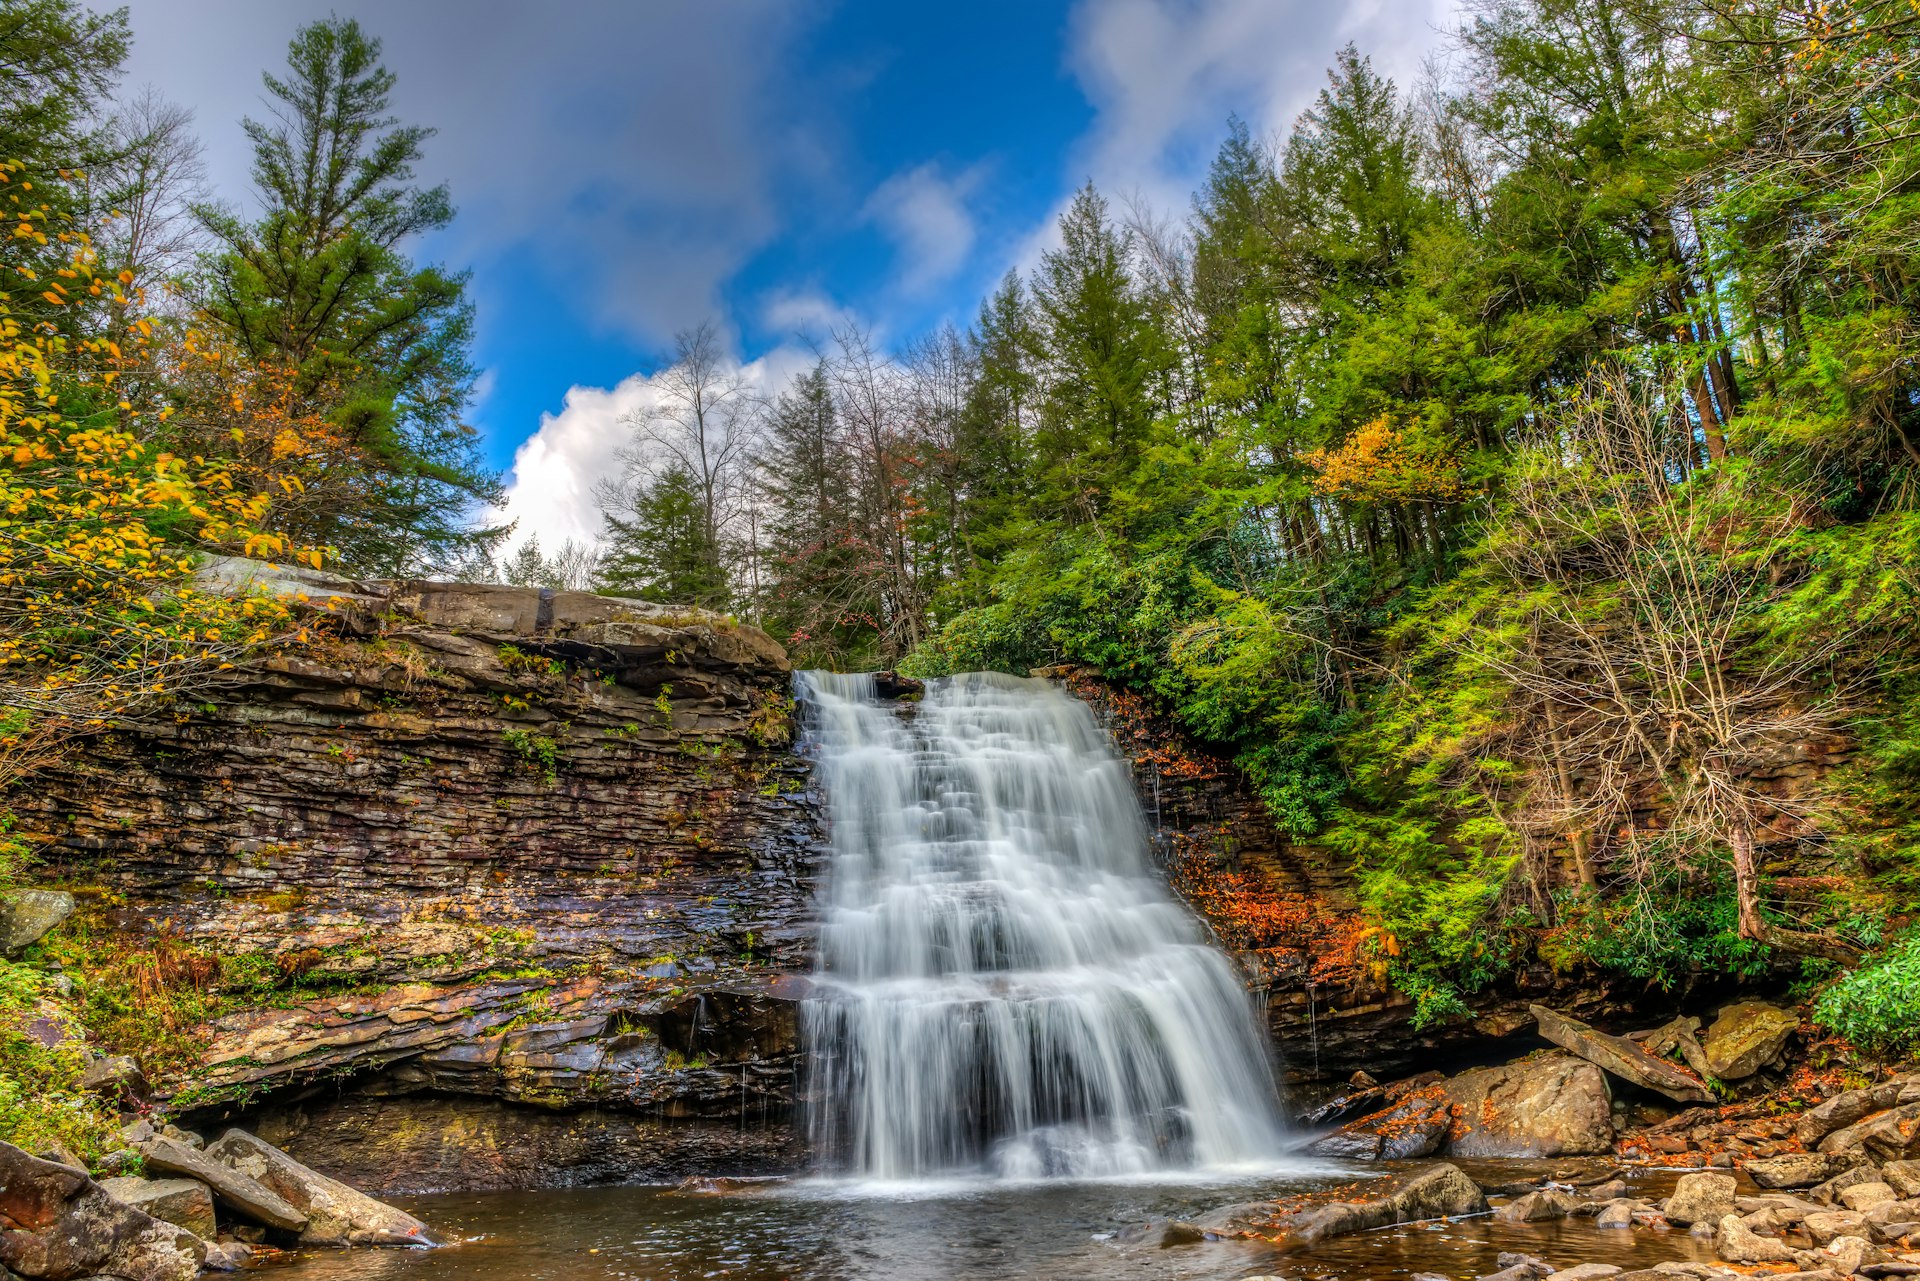 Muddy Falls Waterfall in the Appalachian Mountains during Autumn